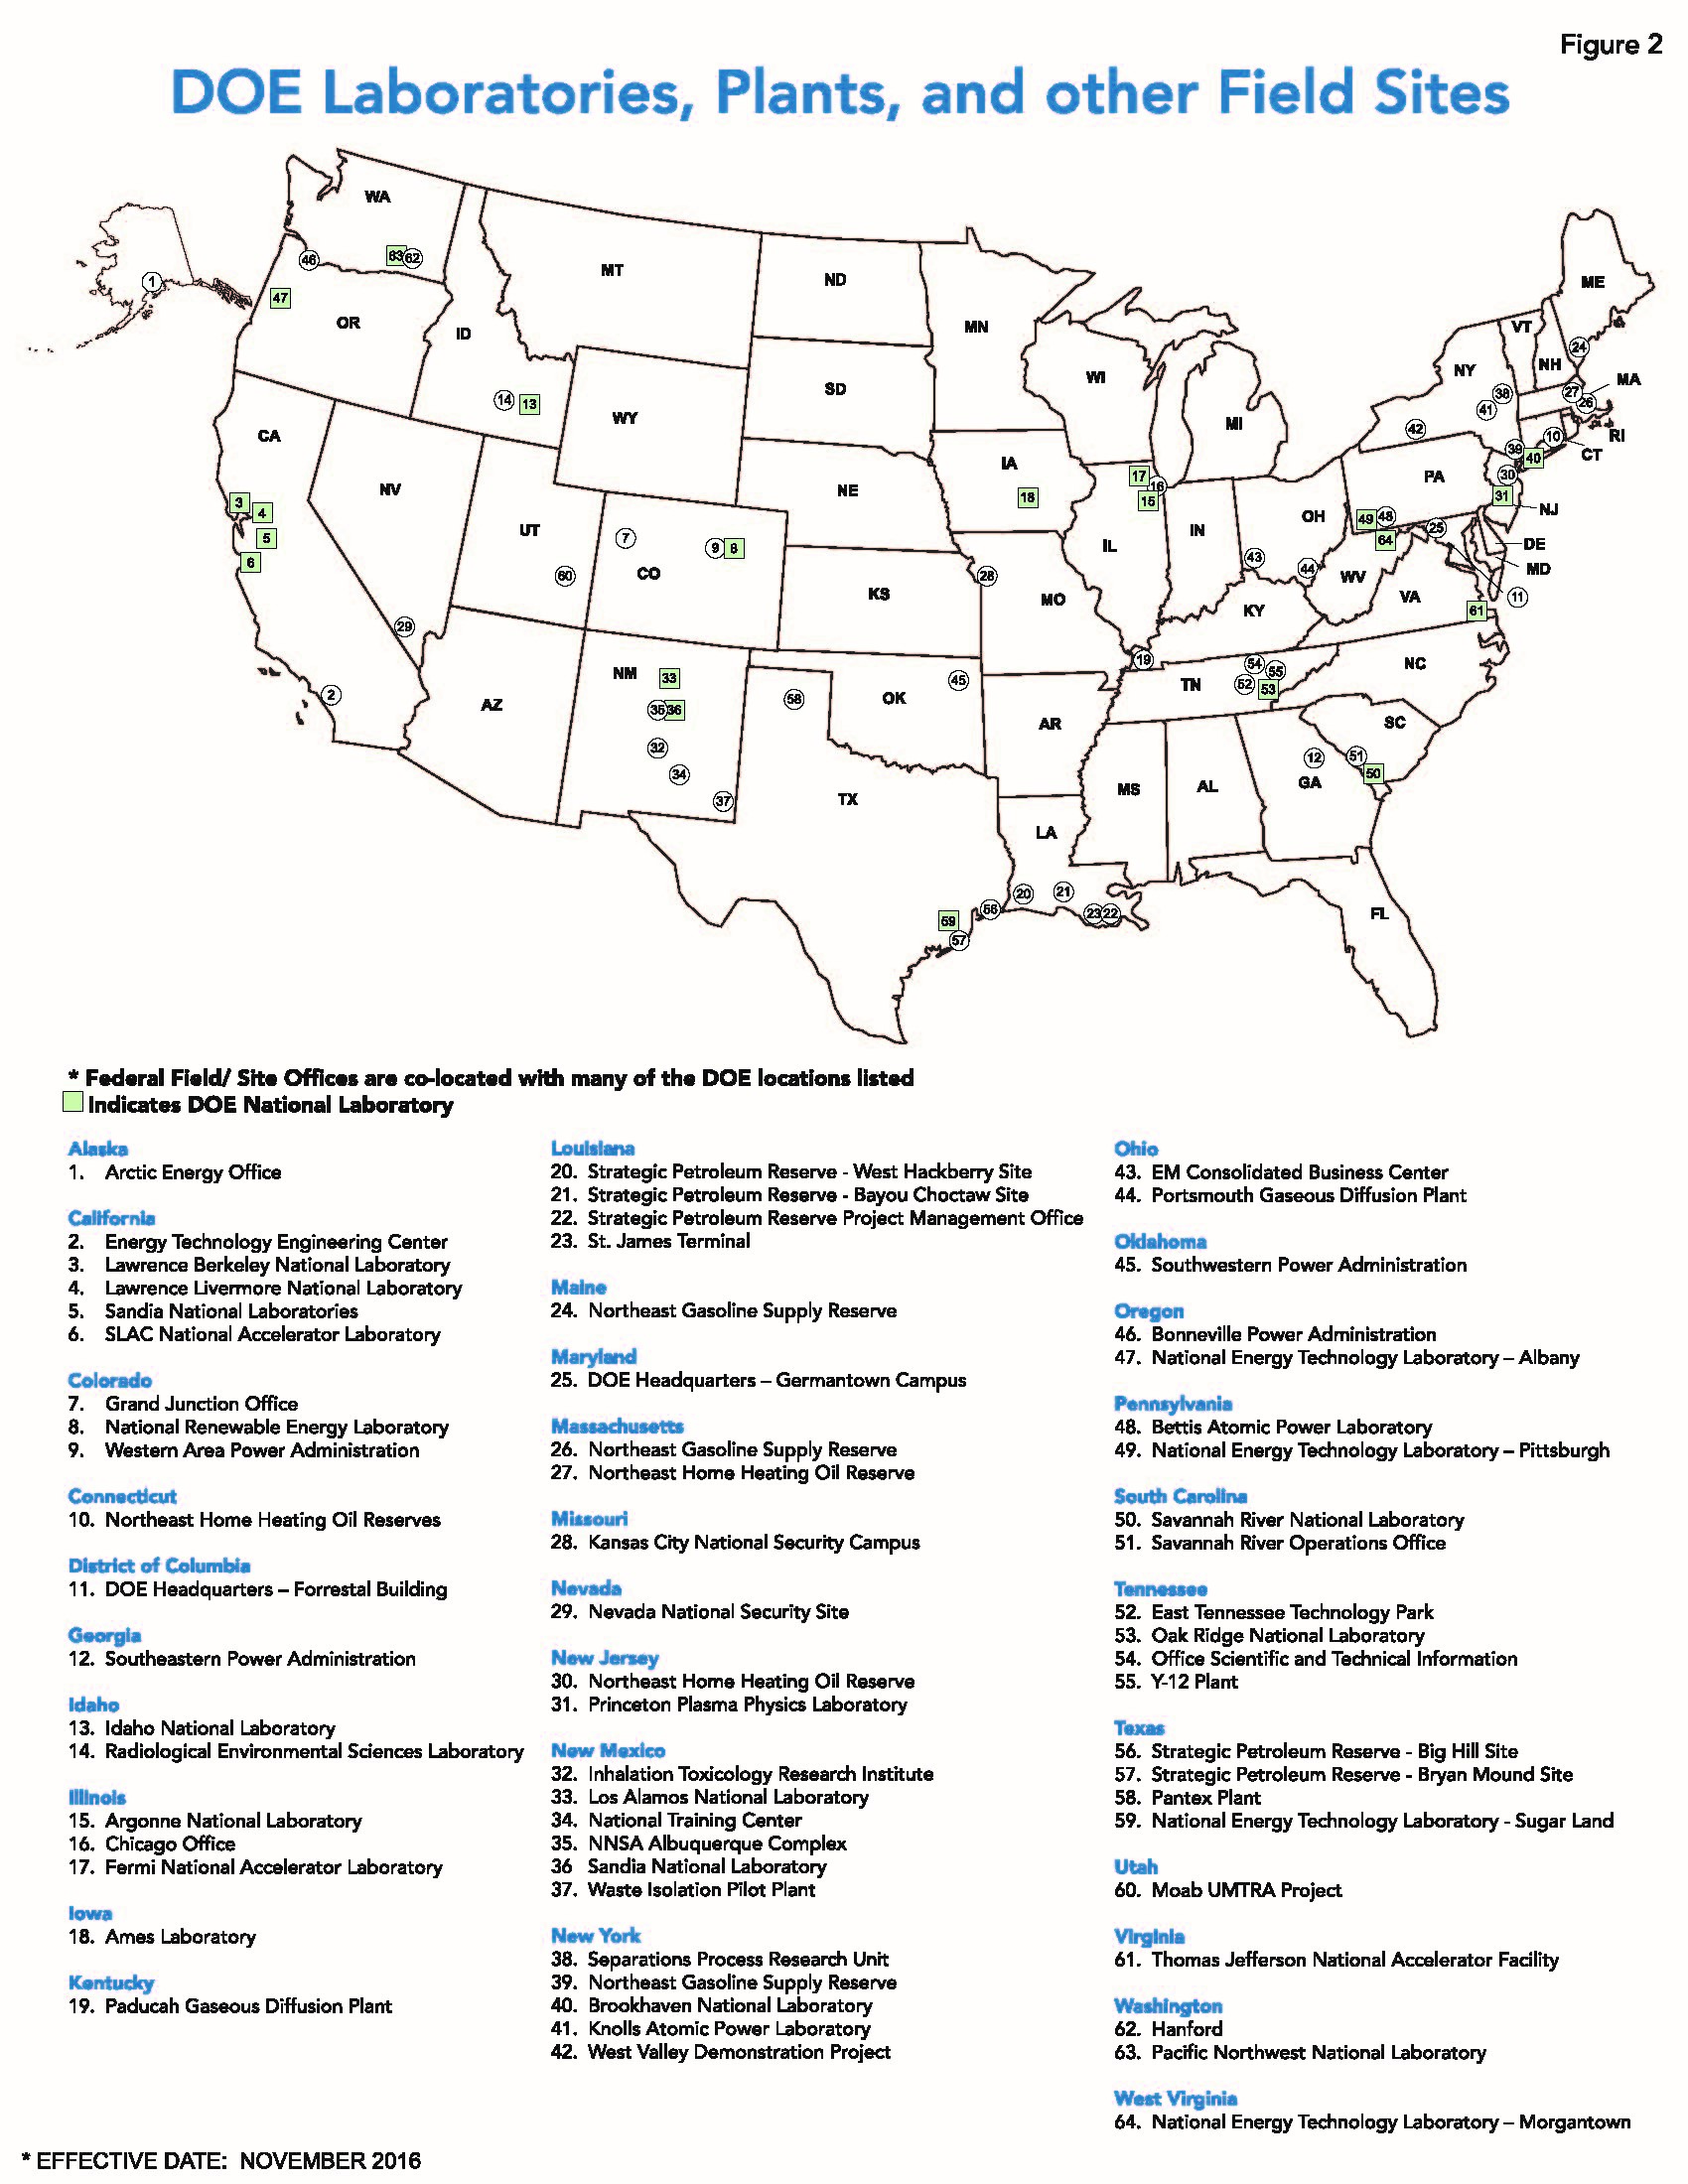 DOE Laboratories, Plants, and other Field Sites